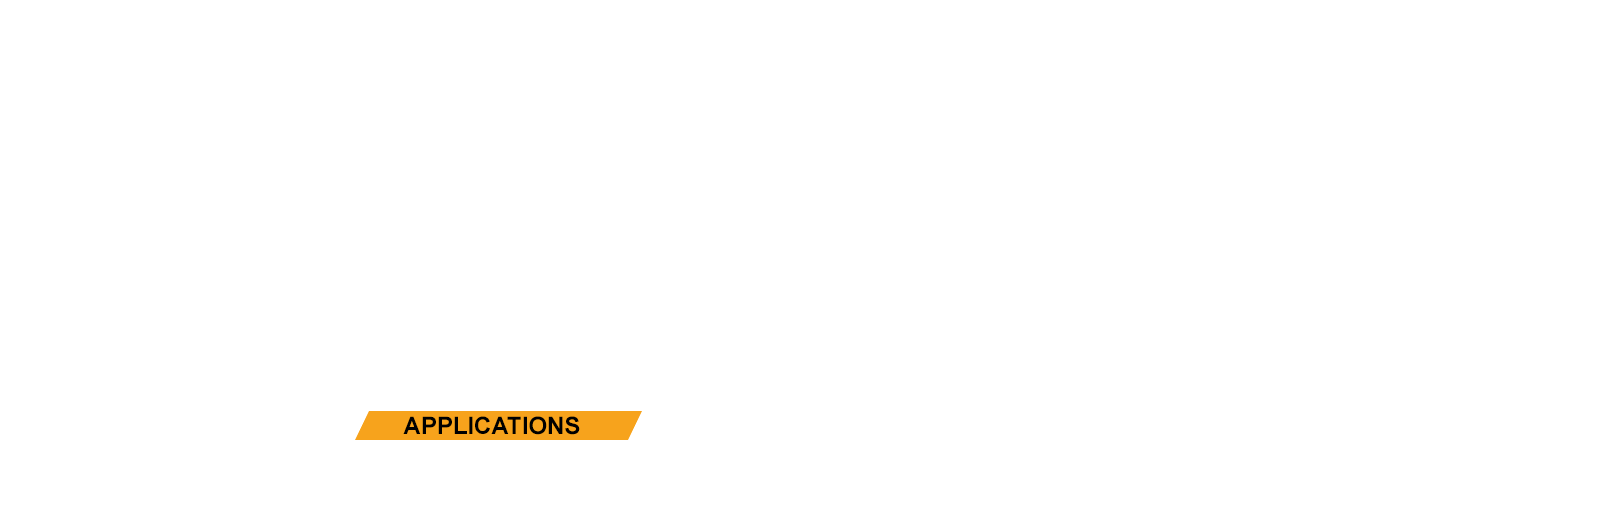 POLYVALENCE D'OUTILLAGE